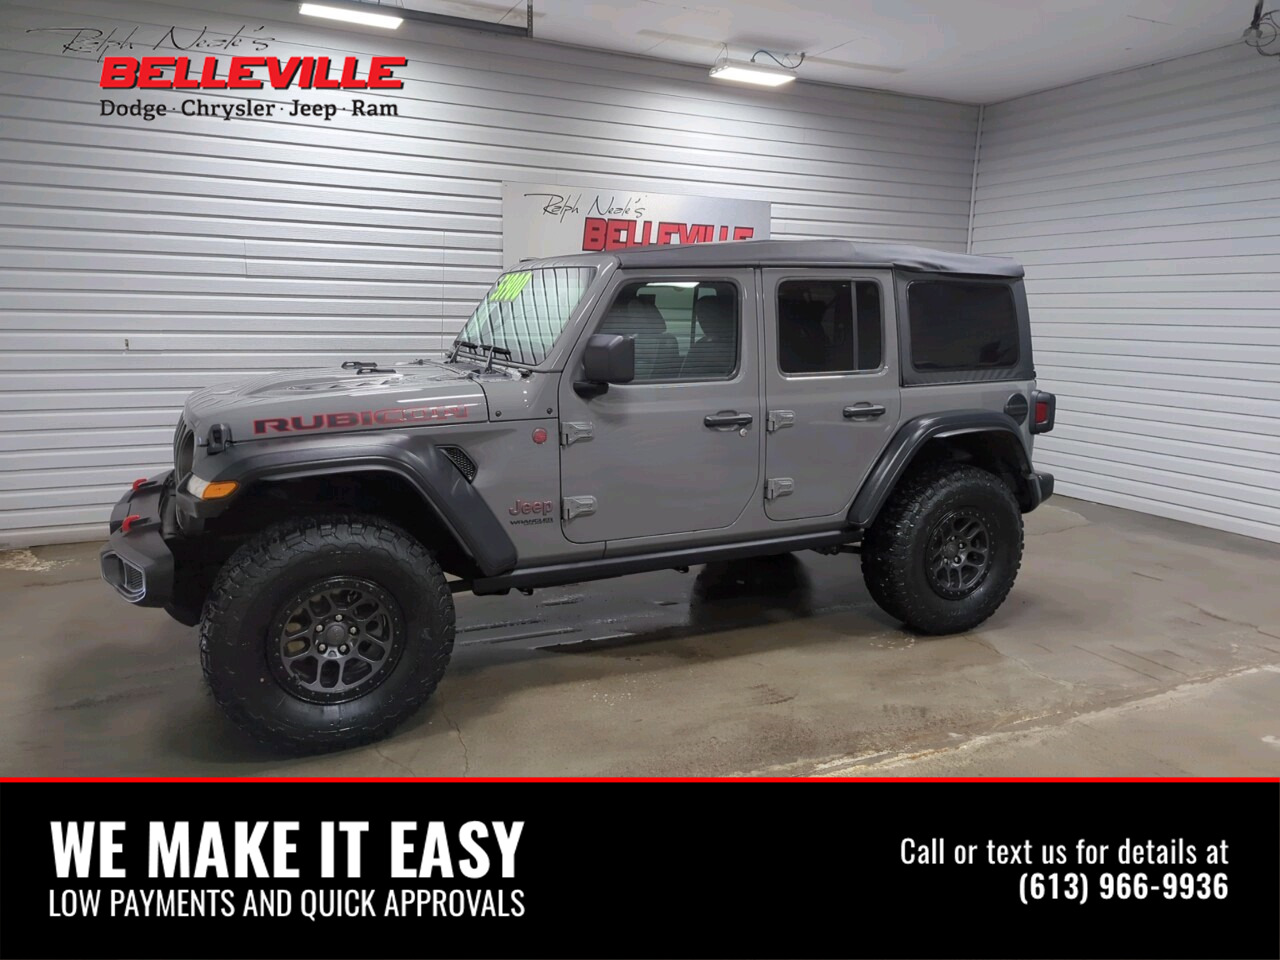 2021 Jeep WRANGLER UNLIMITED Wrangler Unlimited Rubicon with Xtreme Recon 35 in